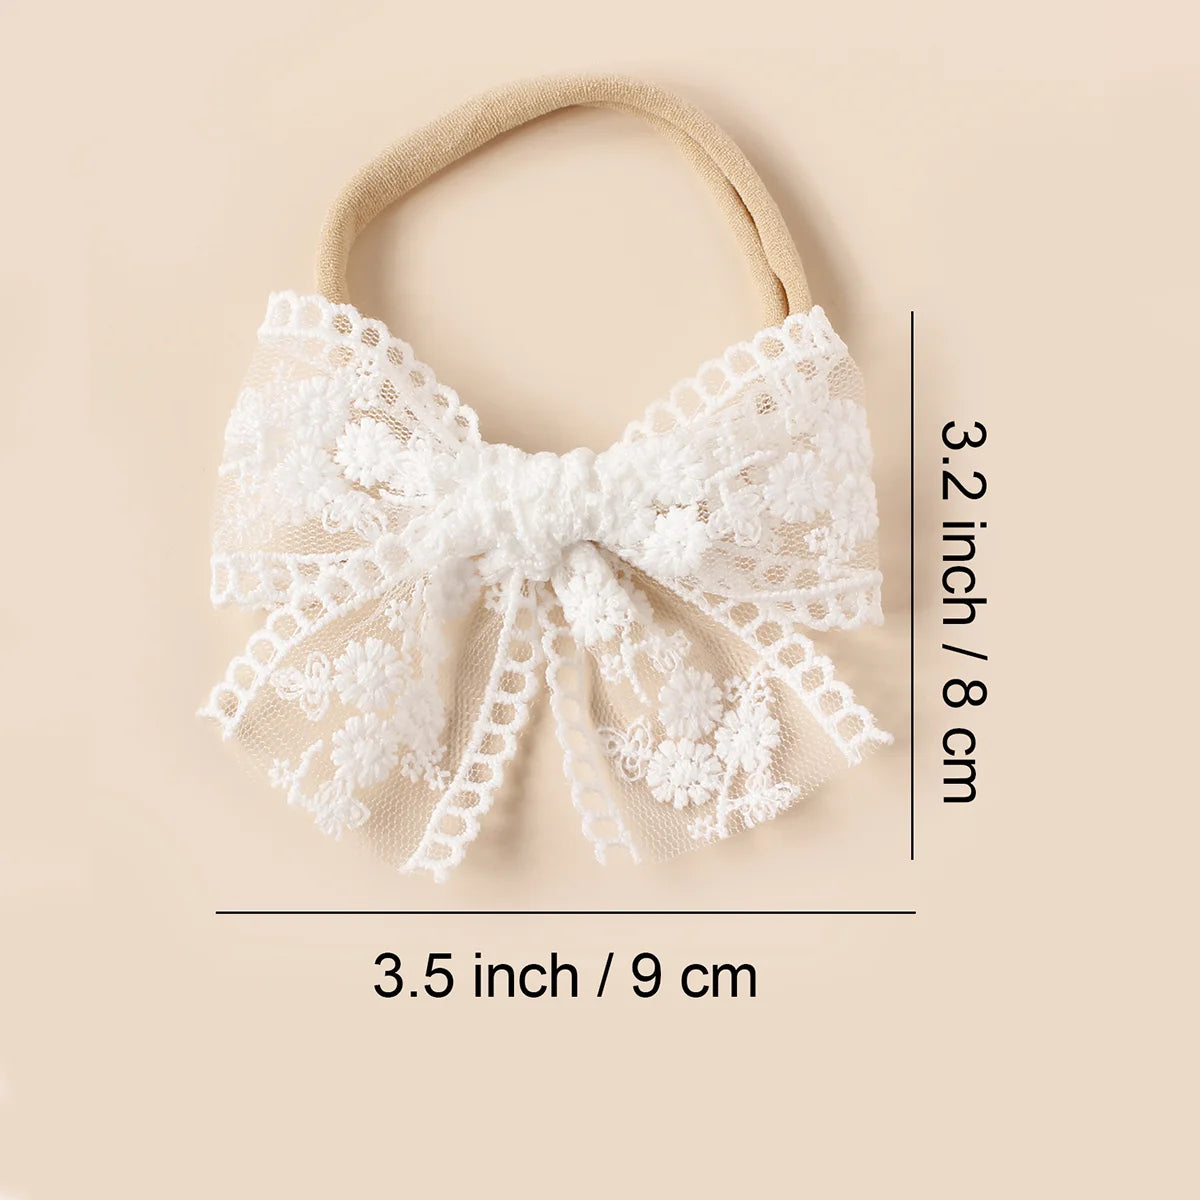 3Pcs/Set Princess Hairband For Baby Girls Soft Elastic Hair Accessories